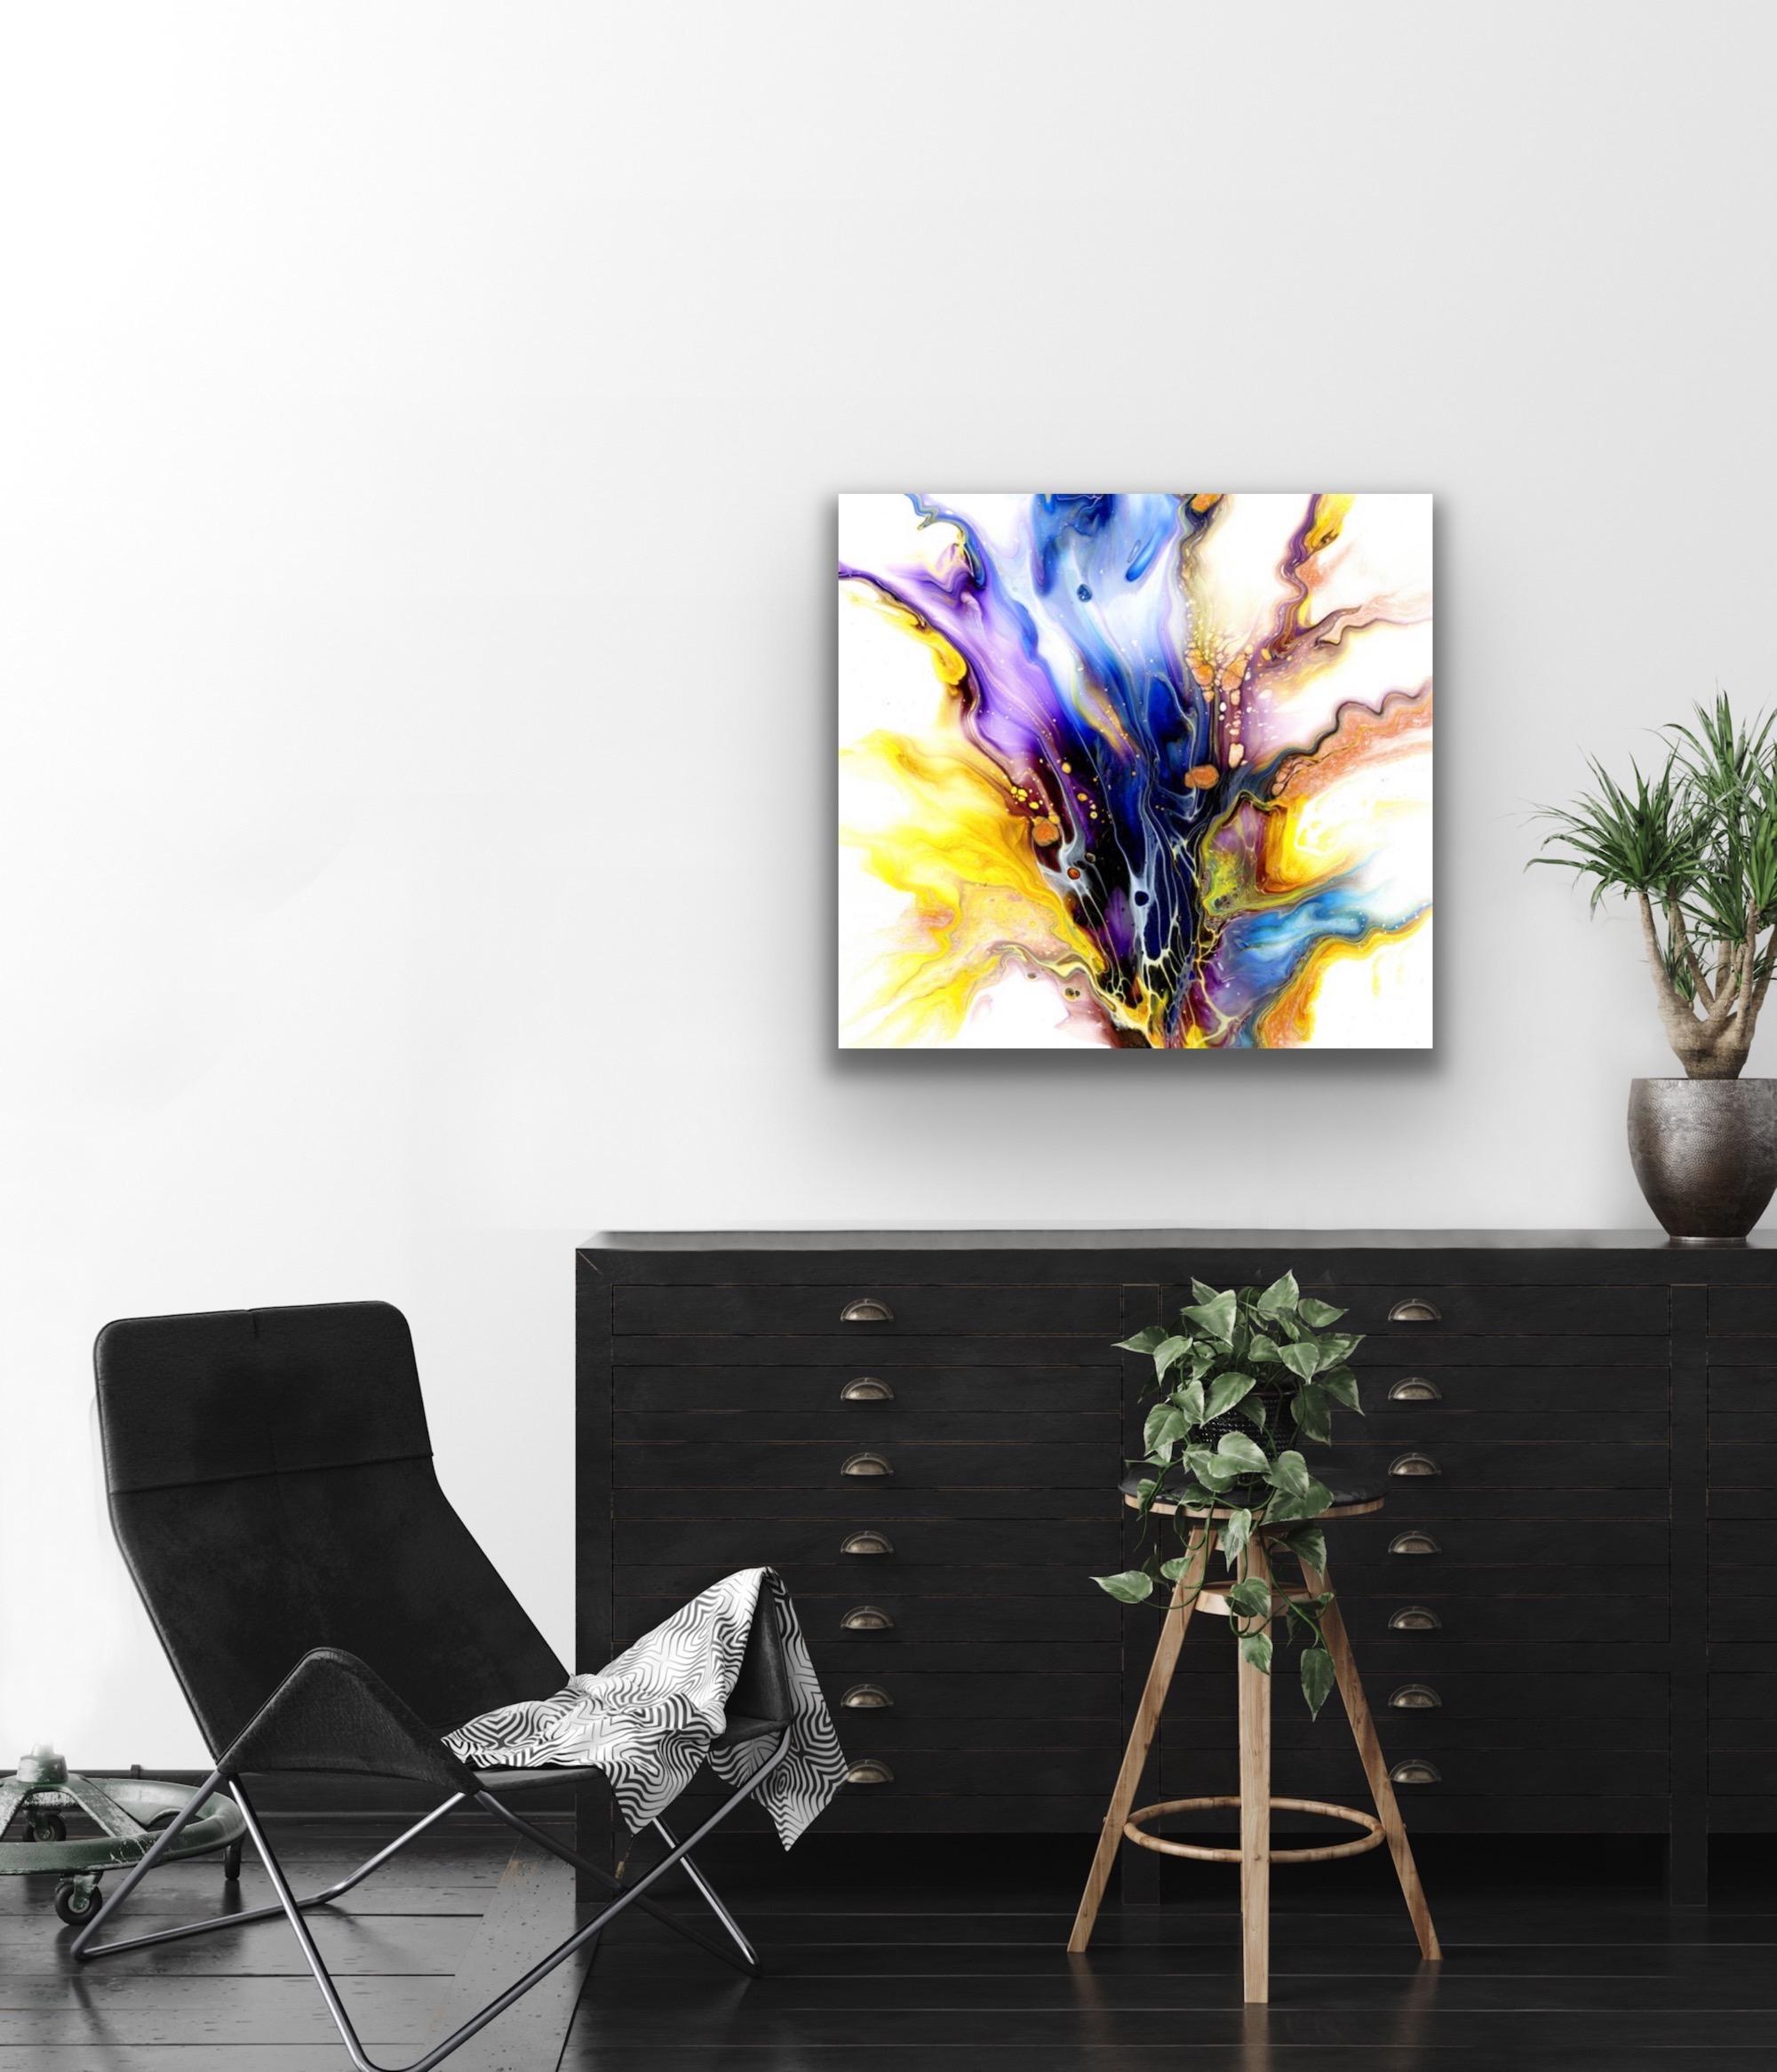 Modern Industrial Abstract Giclee Print on Metal, Contemporary Painting by Cessy For Sale 1